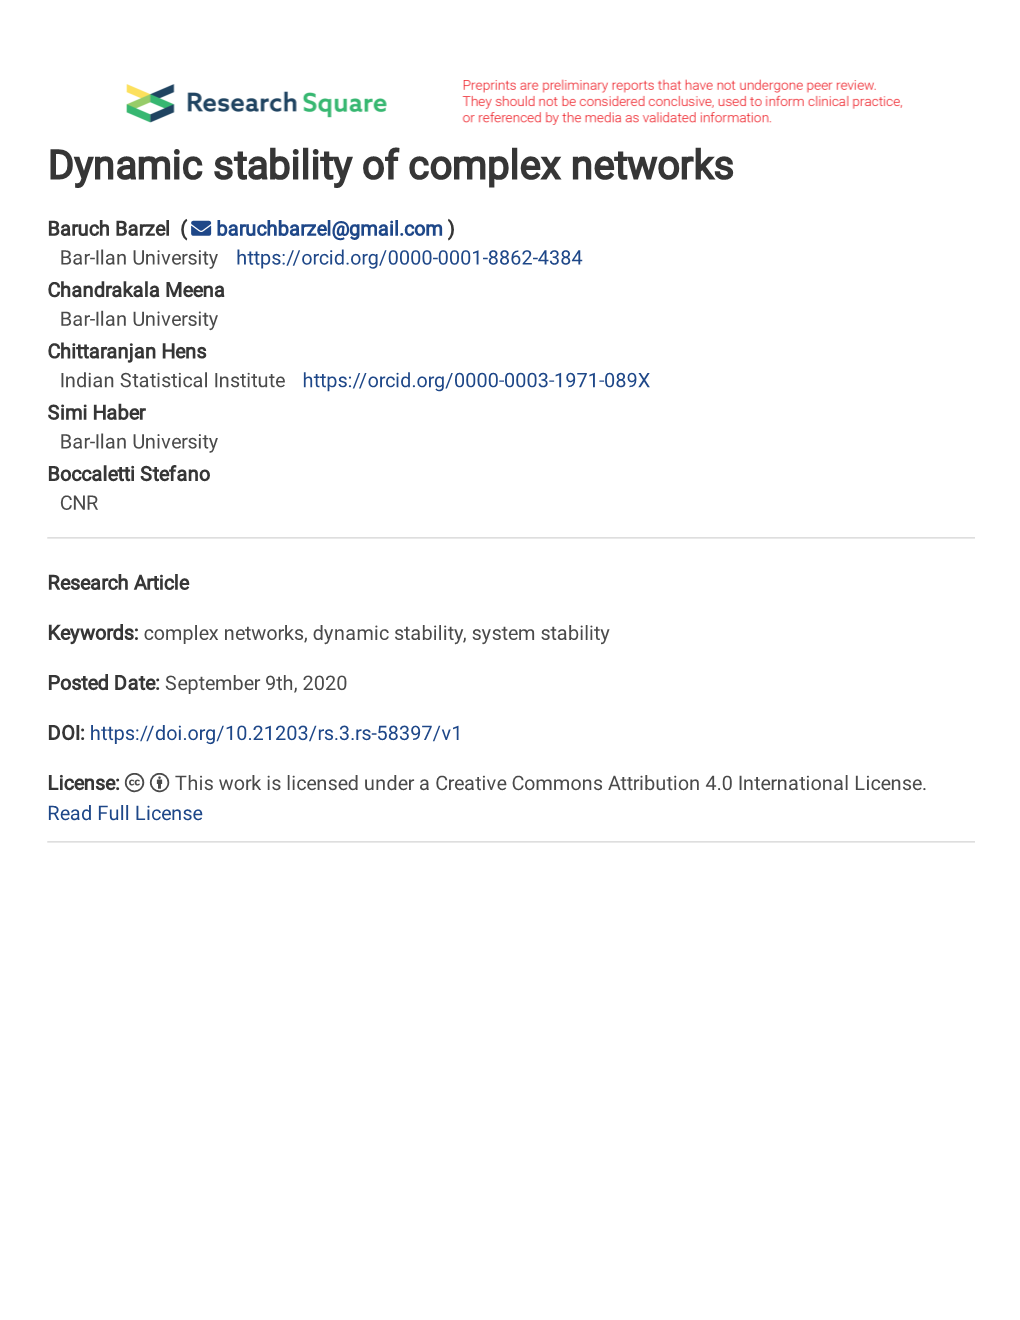 Dynamic Stability of Complex Networks